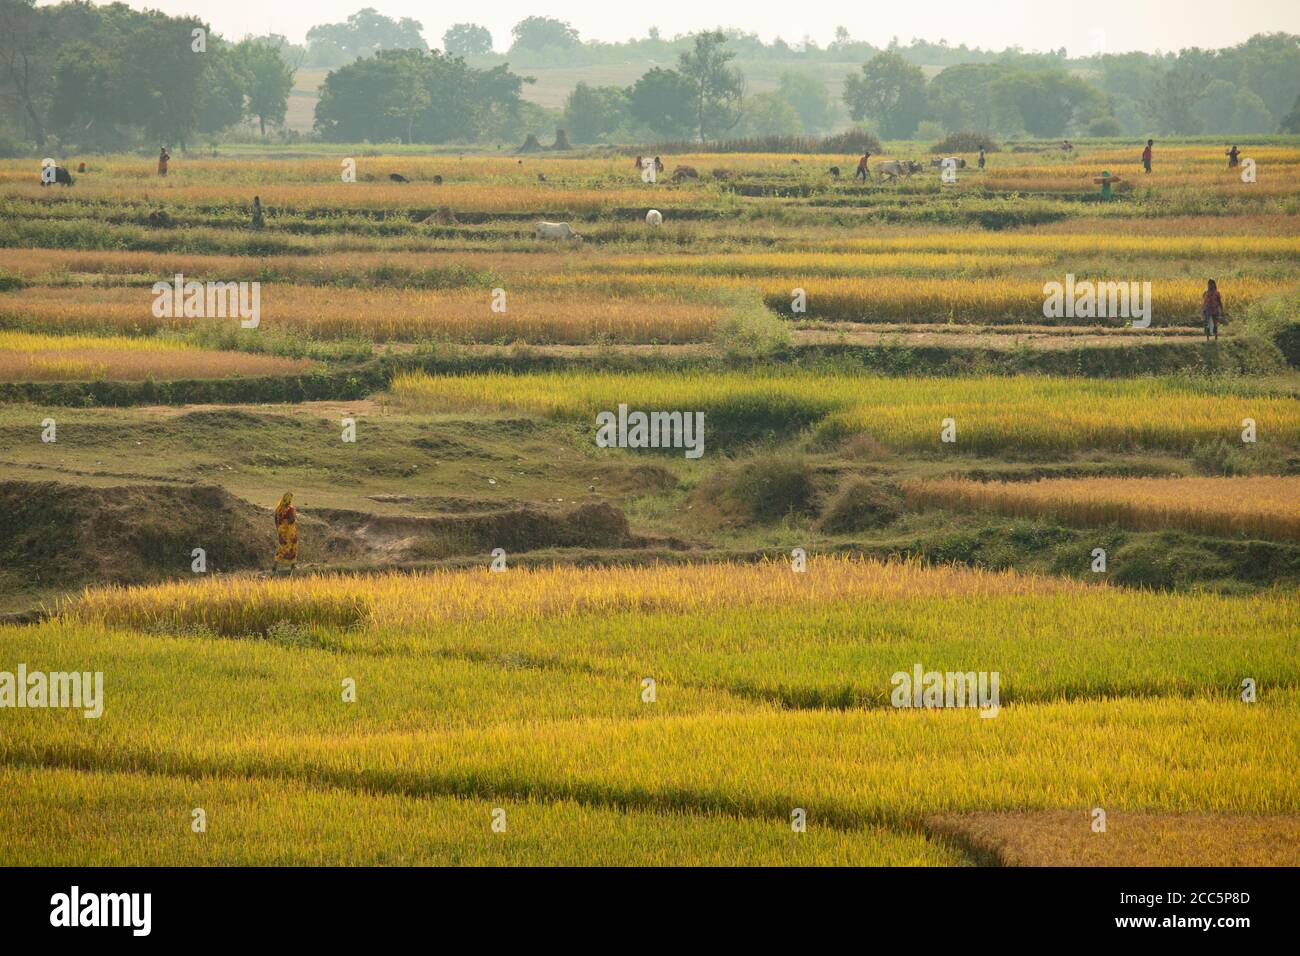 Rice paddies are ready for harvest in Bihar, India, where Lutheran World Relief is carrying out its Partnership Bihar program aimed at empowering women through improved farming and livelihood strengthening.   Pradan (Professional Assistance for Development Action) / Partnership Bihar project.  November 20, 2019 - Jamui District, Bihar State, India. Photo by Jake Lyell for Lutheran World Relief. Stock Photo